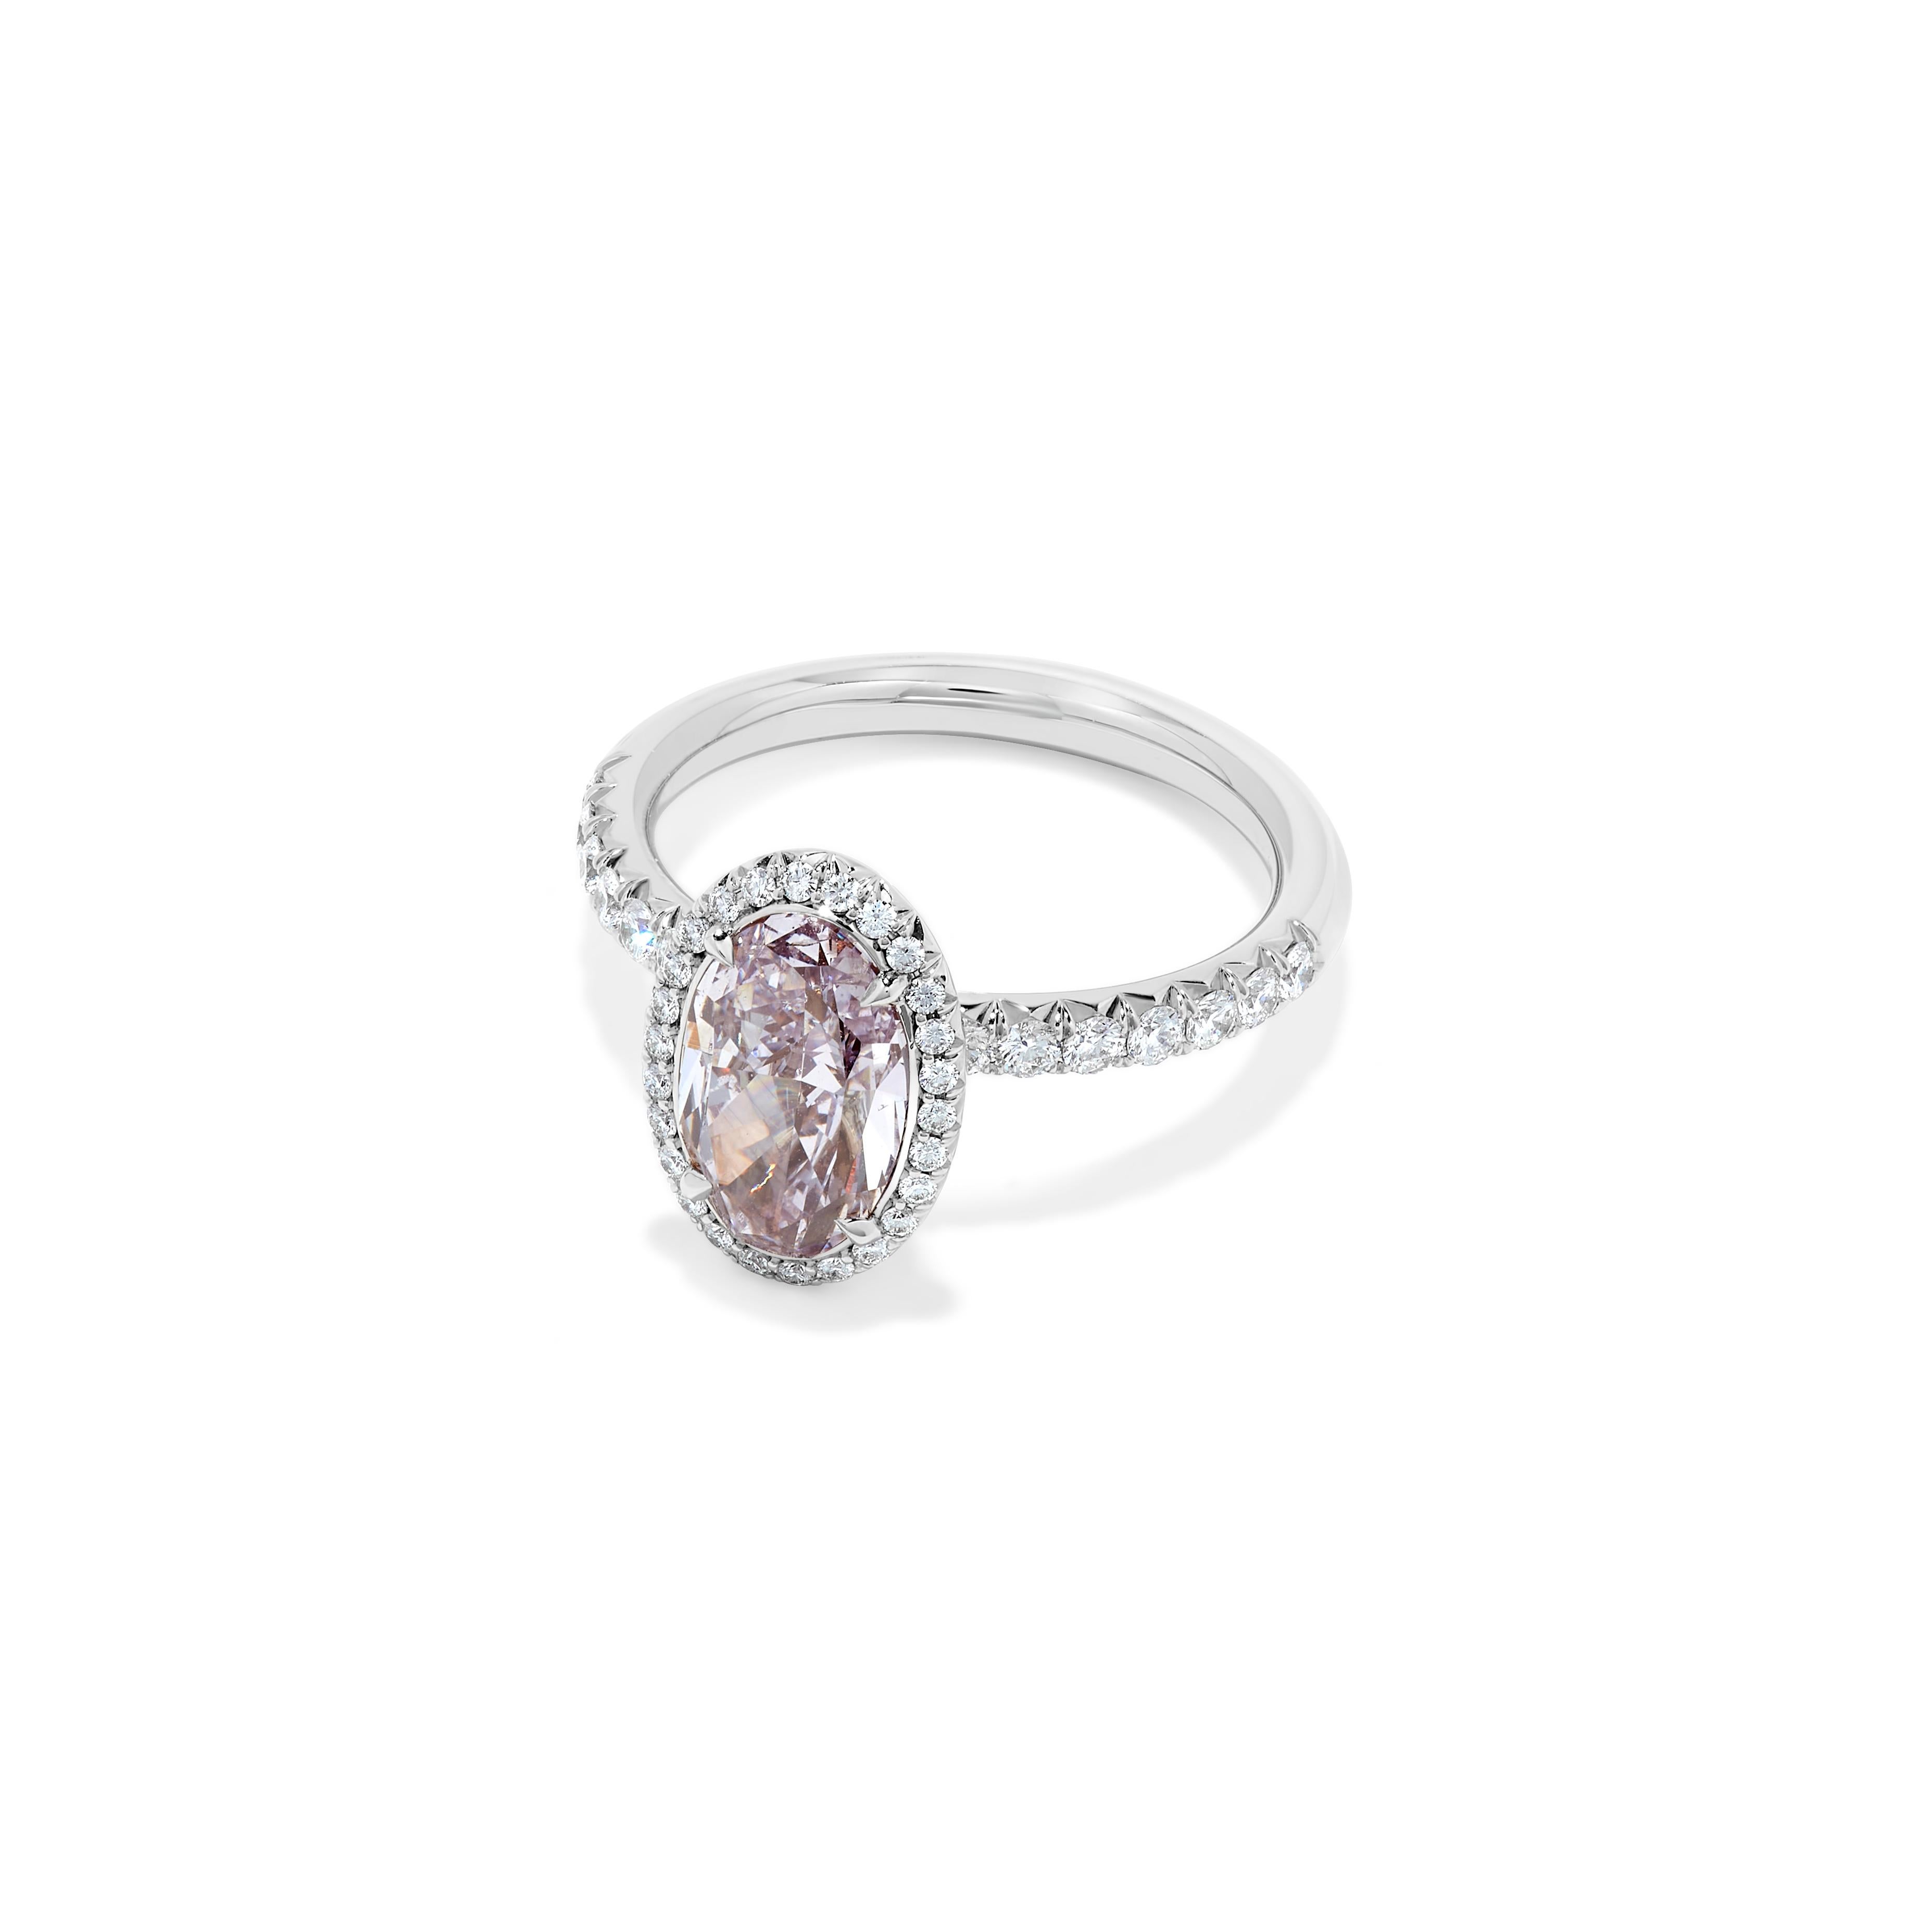 This ring features a 2 carat Fancy Purple-Pink SI2 Clarity diamond. The stone is completely clean to the eye. With a micro-pave platinum mounting featuring 40 stones for a total weight of 0.40 cts. Along with GIA Certificate. Size 6. 

Resizeable